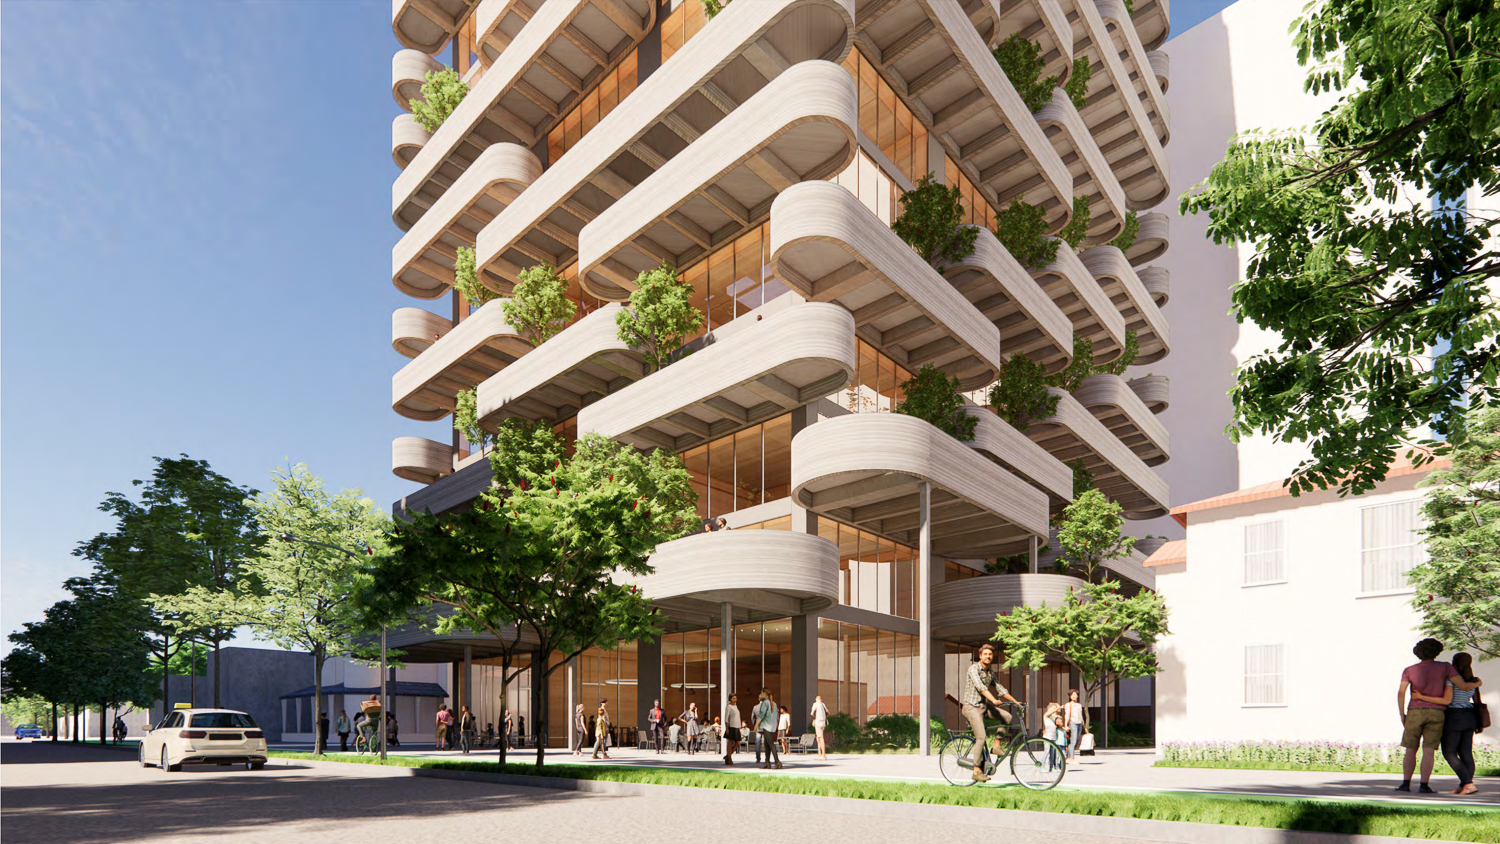 420 South 3rd Street Tower C ground level view, rendering by RMW Architecture